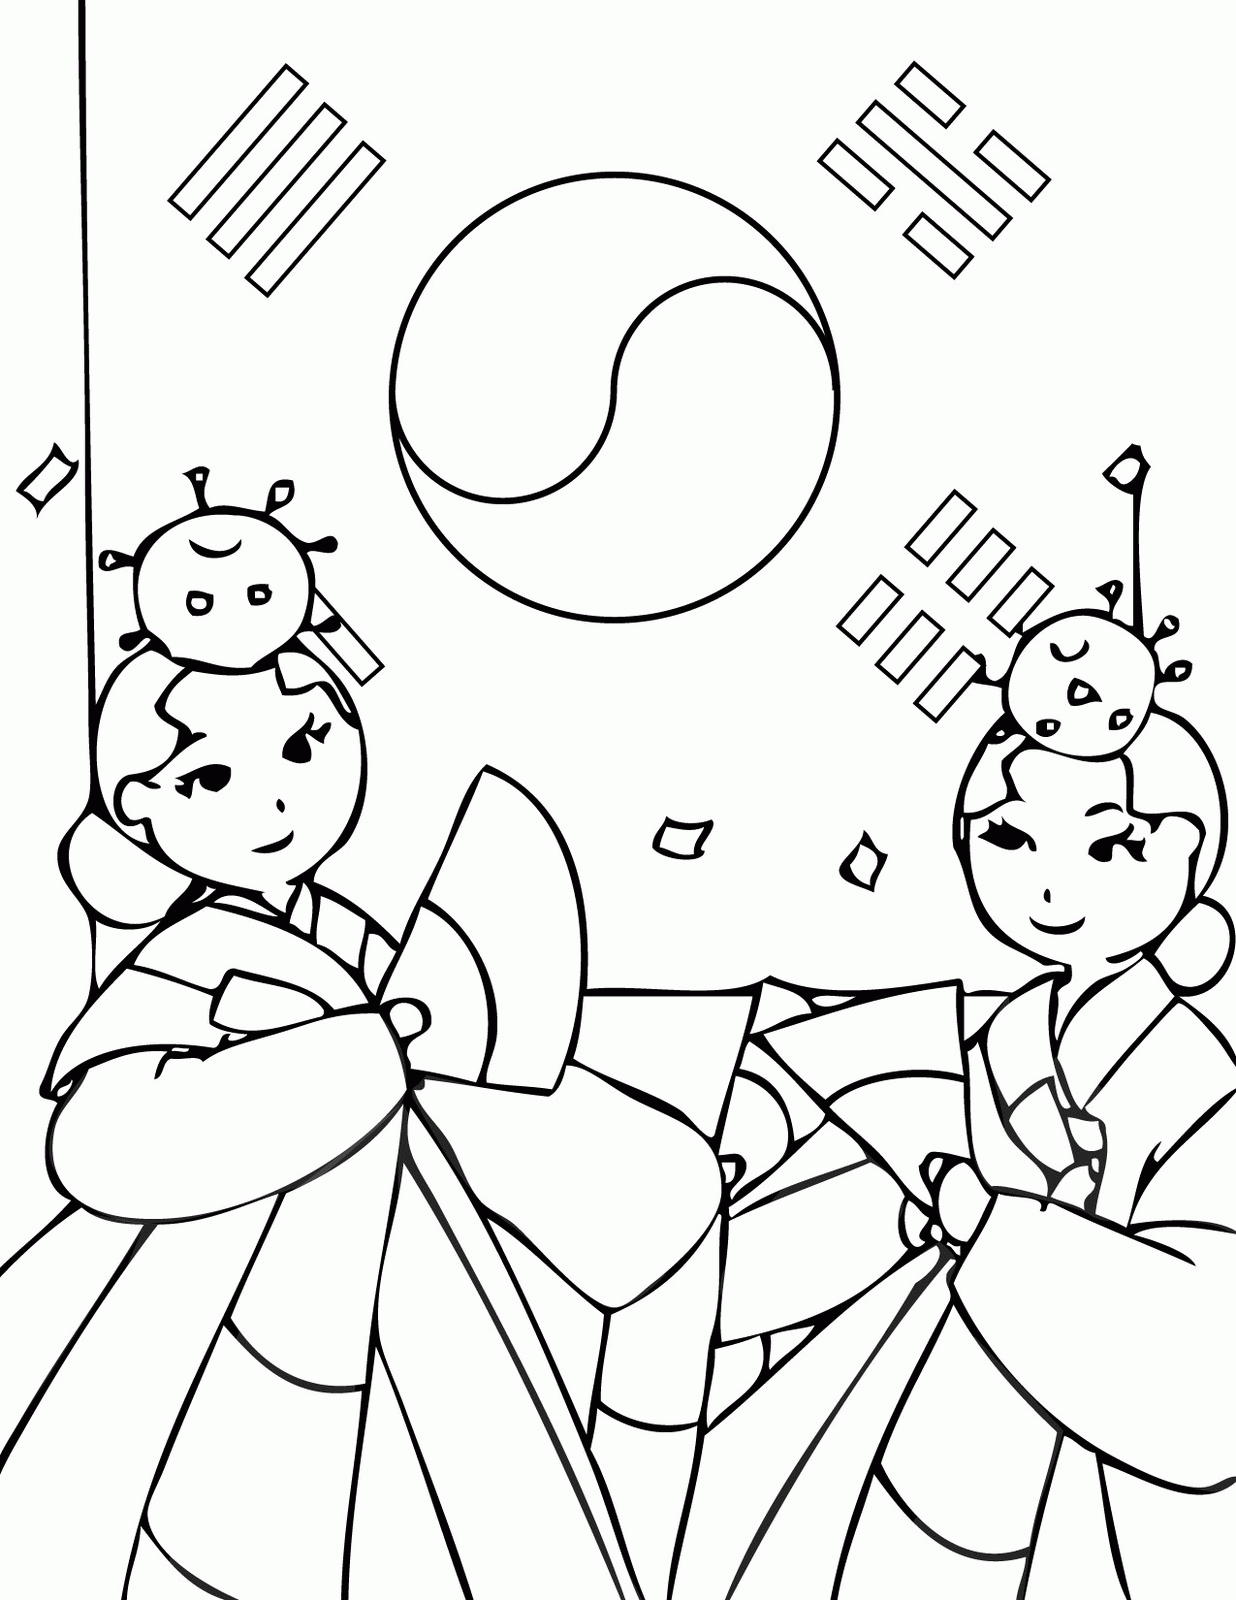 Download Korean Flag Coloring Page - Coloring Home